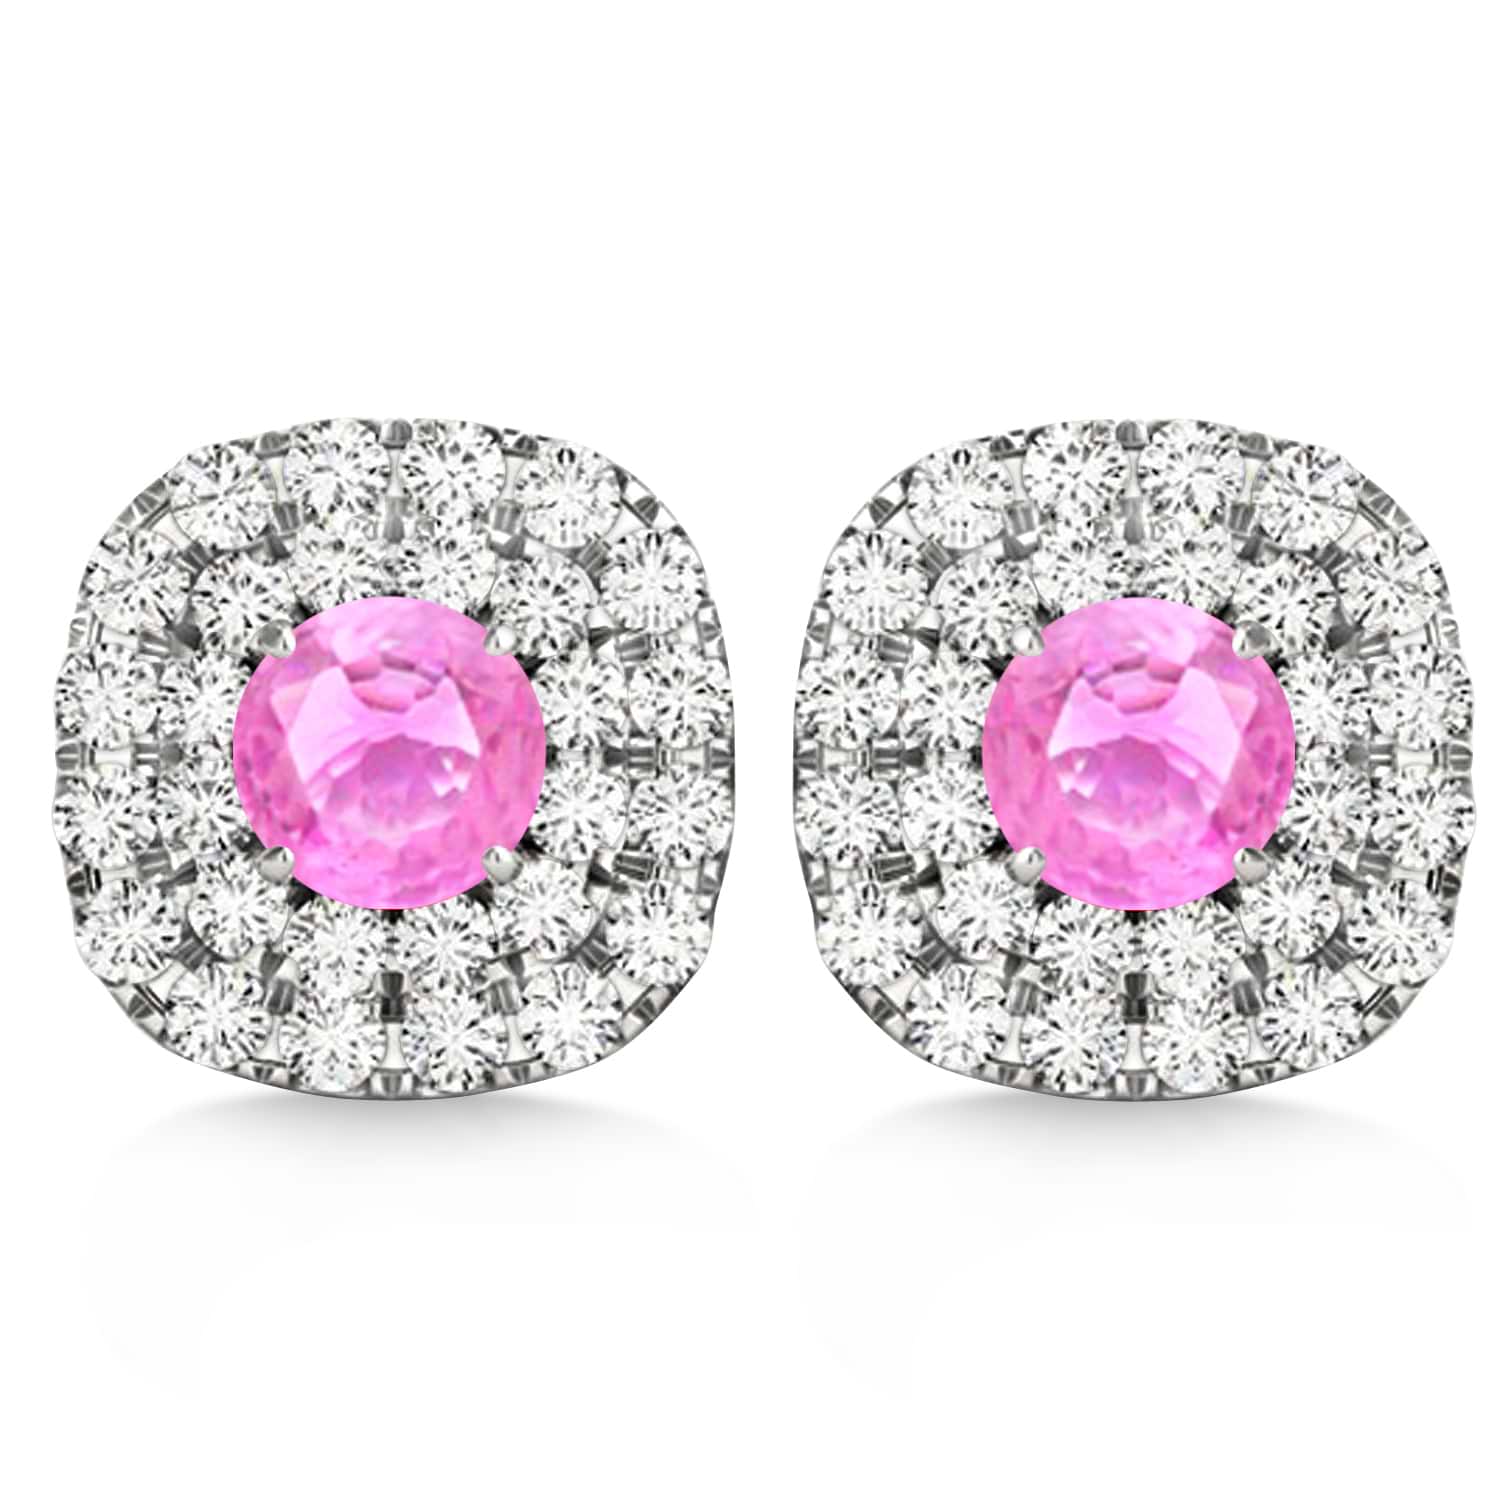 Double Halo Pink Sapphire & Diamond Earrings 14k White Gold (1.36ct)